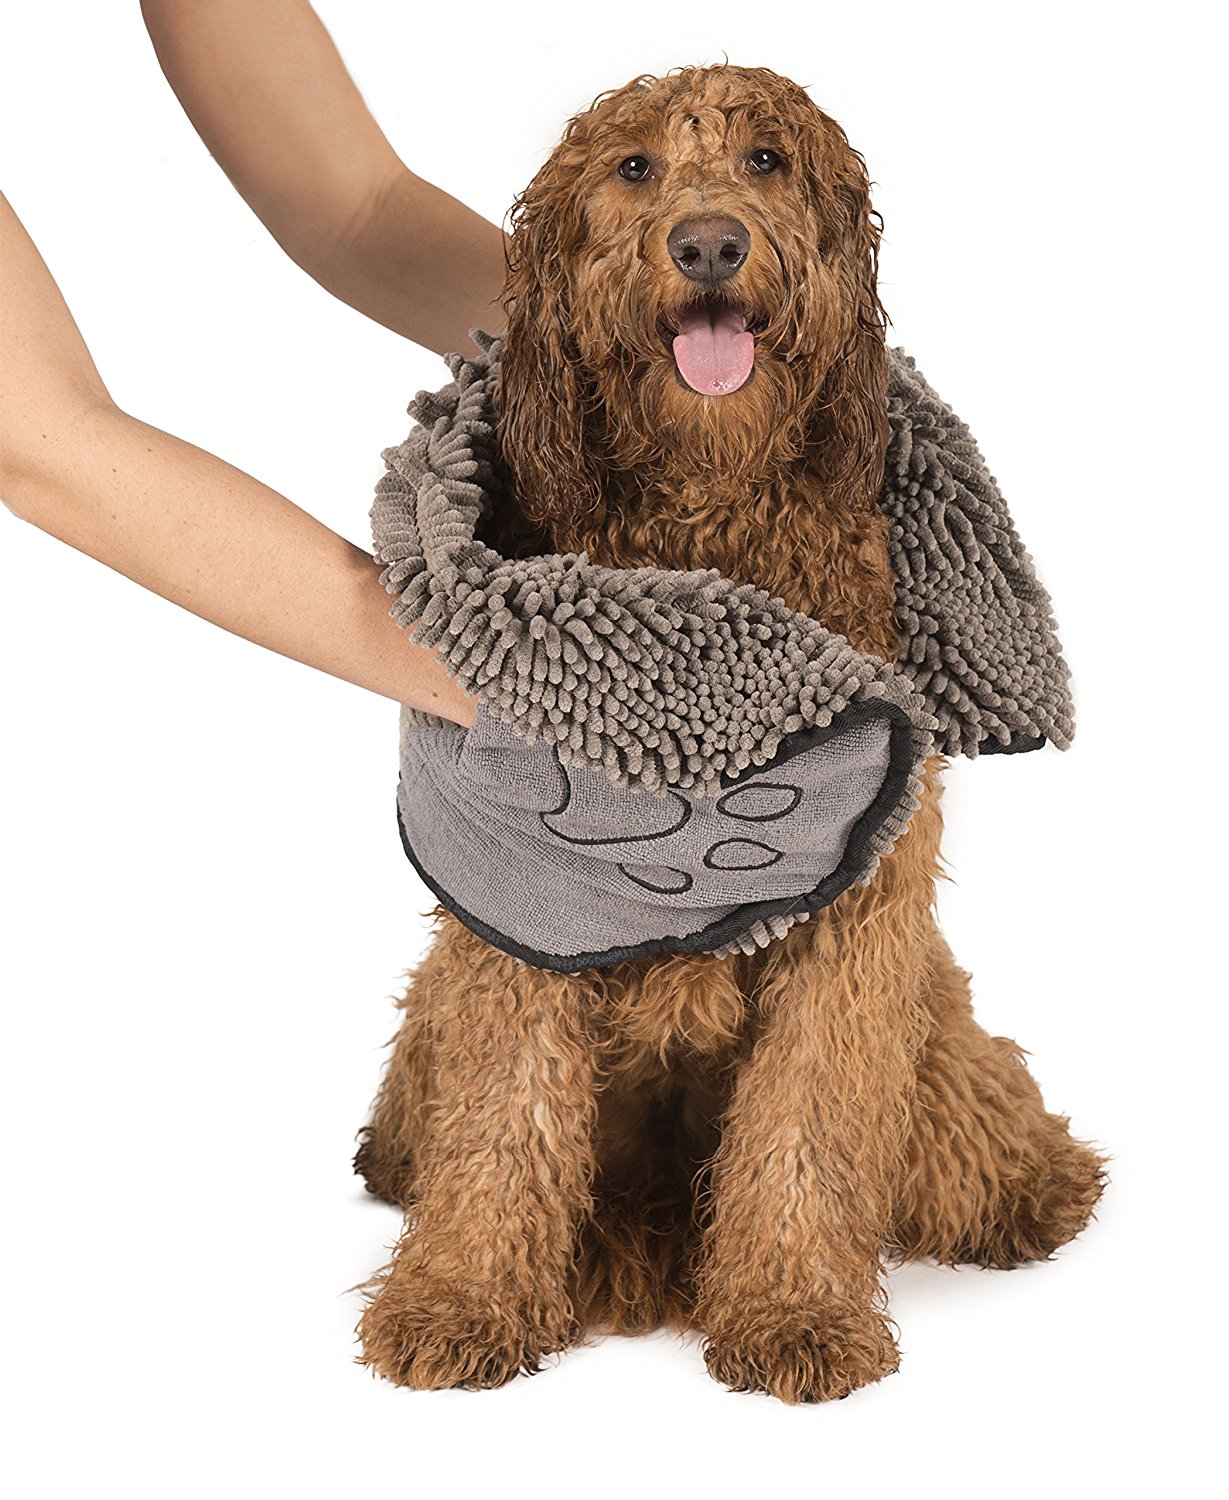 Dog Gone Smart Dirty Dog Shammy Towel can help you your wet dog dry after a bath It s an absorbent microfiber towel that soaks up 20 times the amount